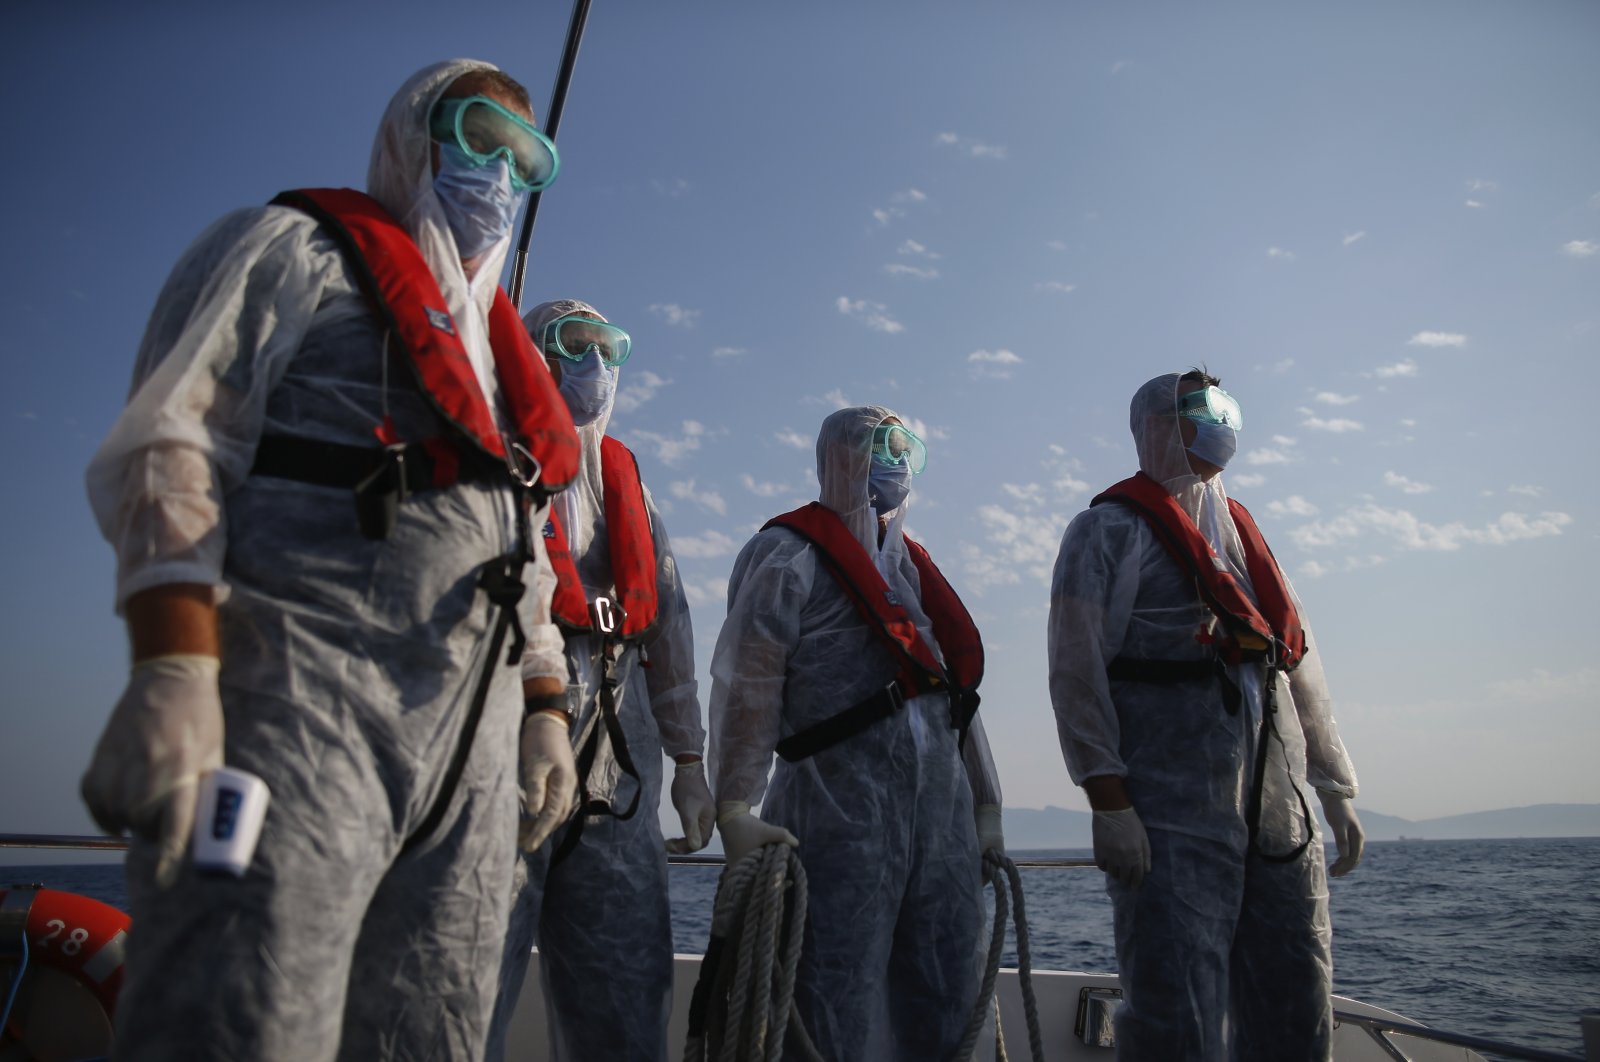 Turkish coast guard officers, wearing protective gear to help prevent the spread of the coronavirus, approach a life raft with migrants during a rescue operation in the Aegean Sea, between Turkey and Greece, Sept. 12, 2020. (AP File Photo)